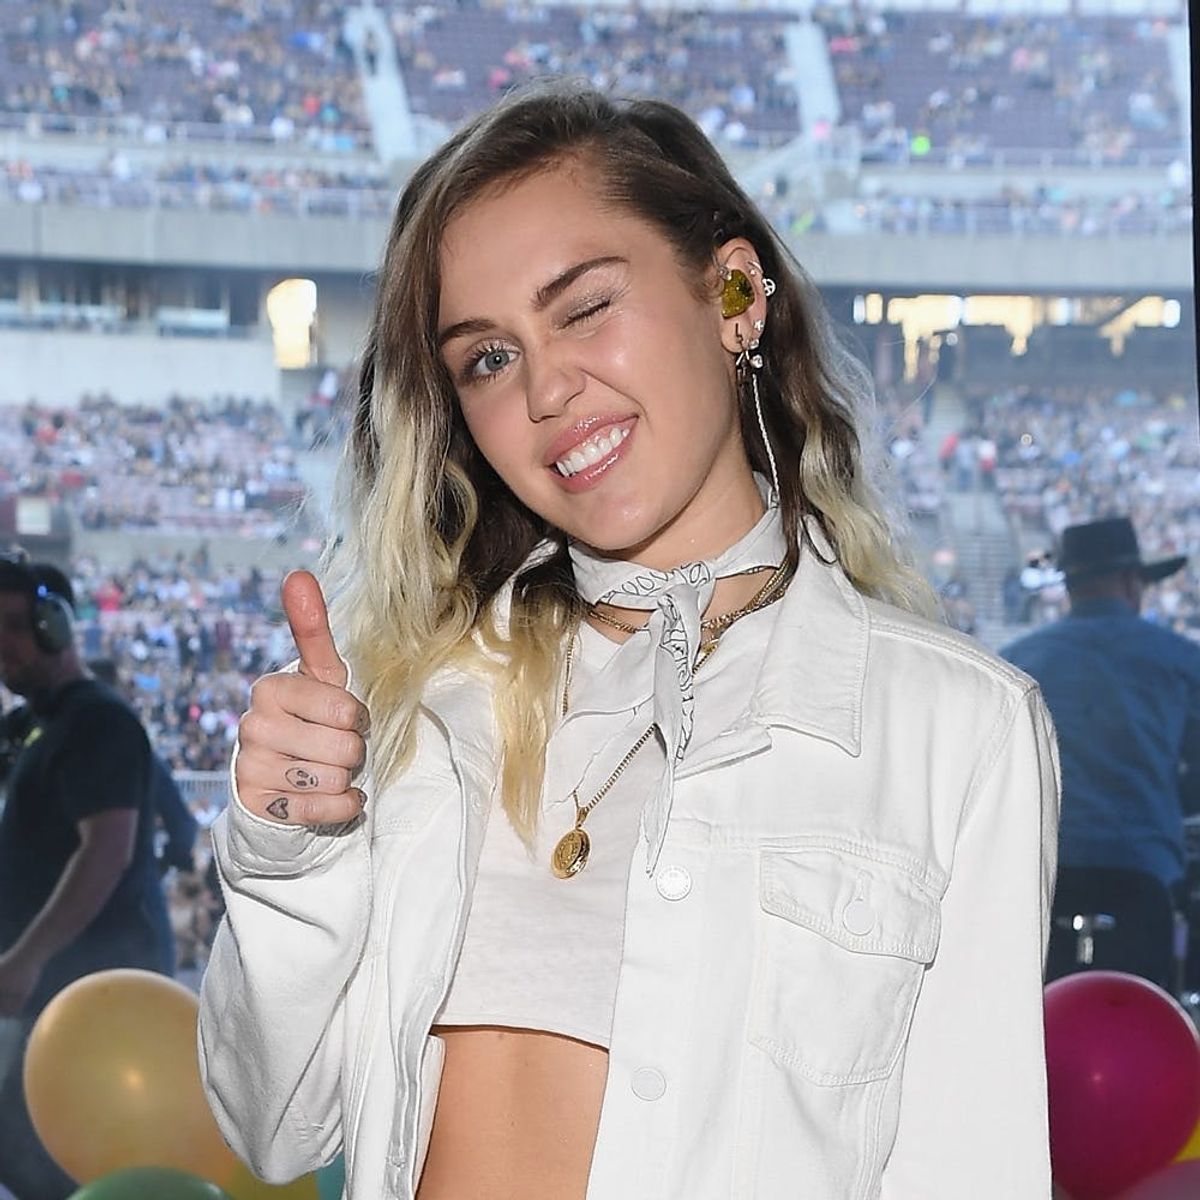 Check Out Miley Cyrus in Disguise and Busking in the Subway